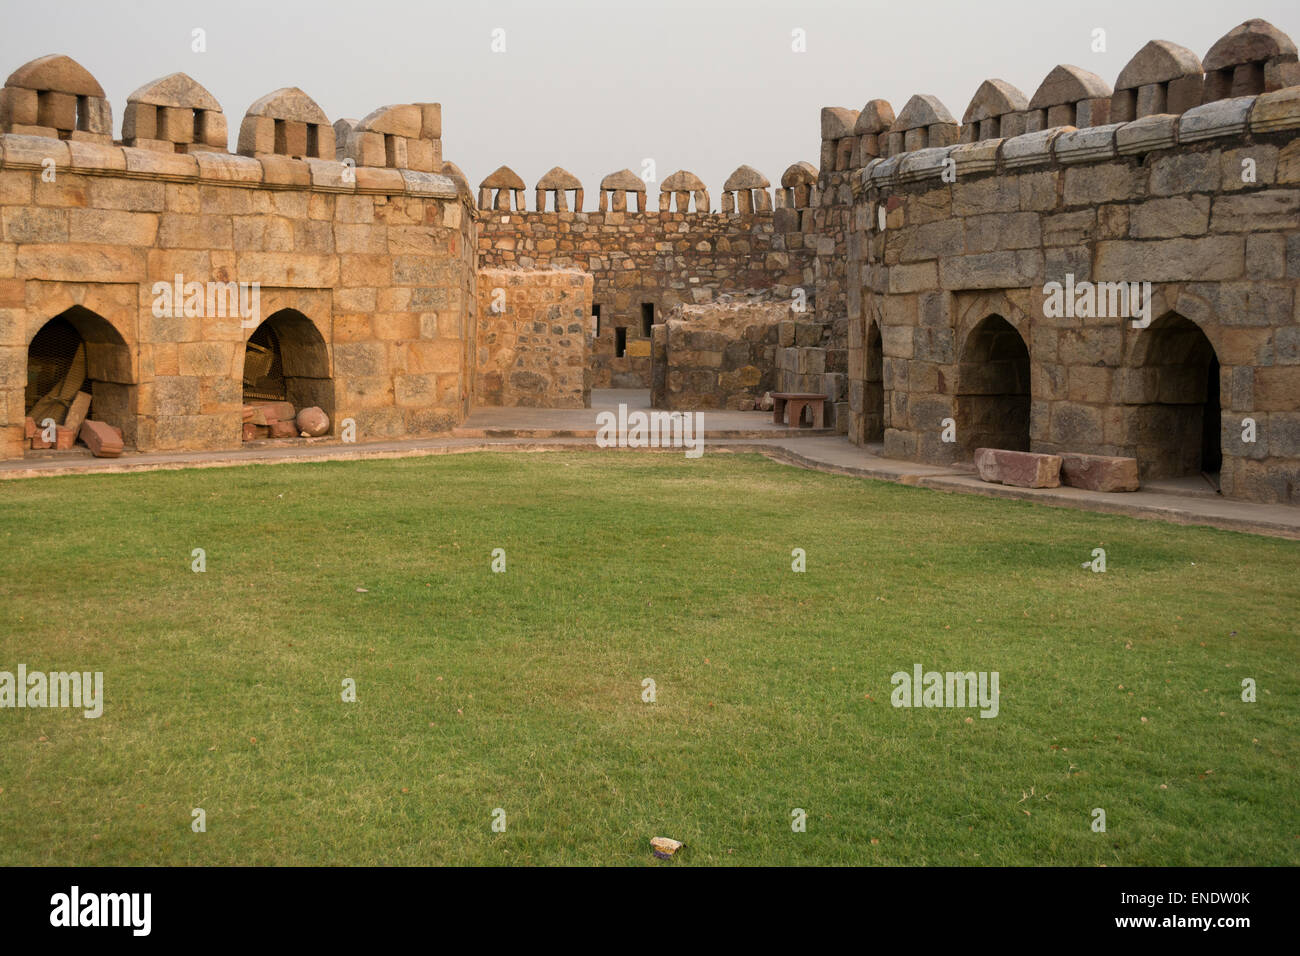 Massive fortifications of Tughluqabad Fortress Stock Photo